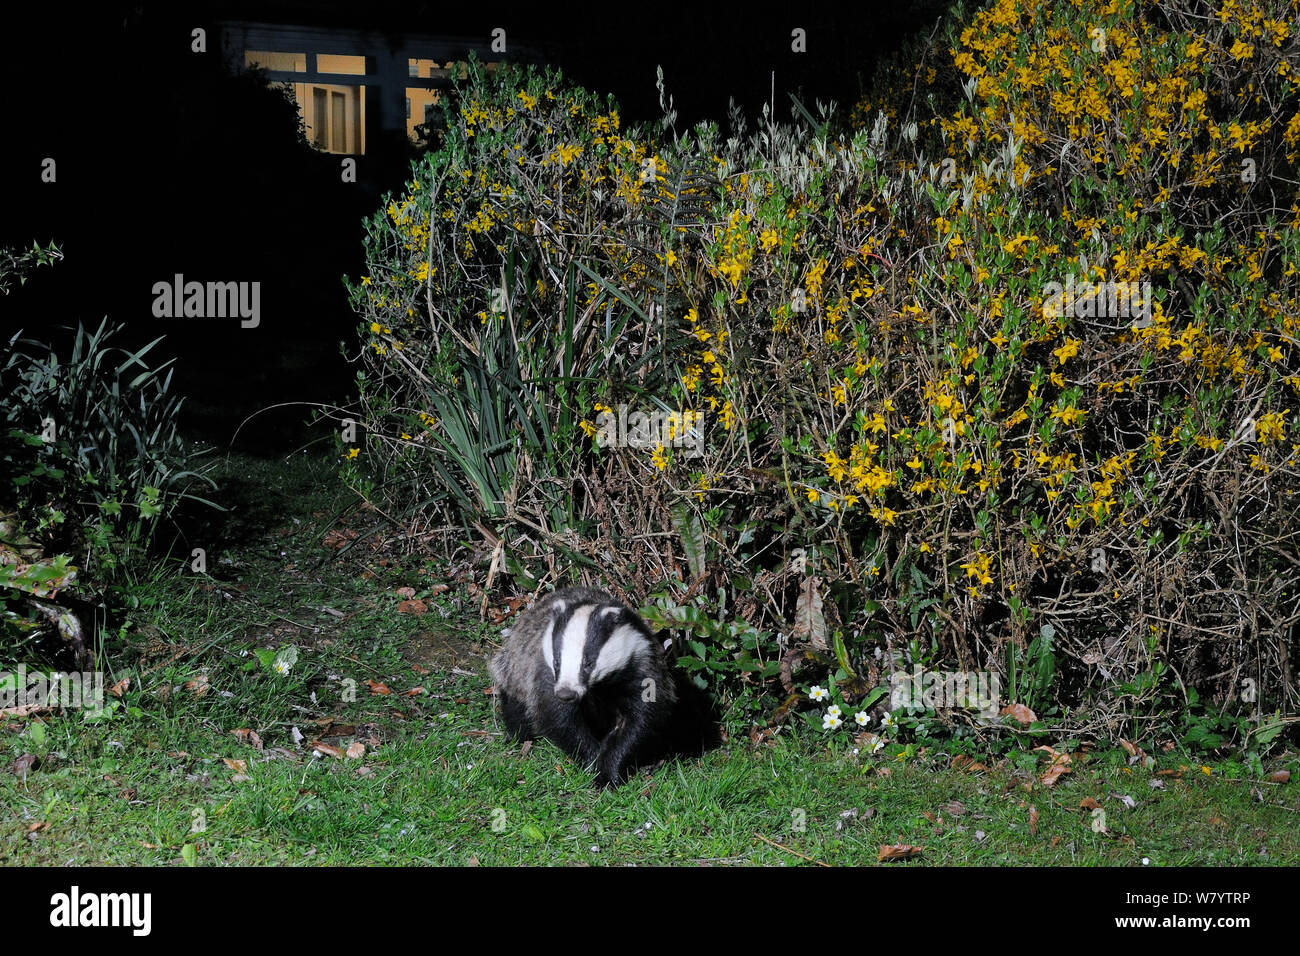 European badger (Meles meles) crossing a garden lawn soon after dark close to a house and flowering Forsyhia hedge, Wiltshire, UK, April.  Taken by a remote camera trap. Stock Photo